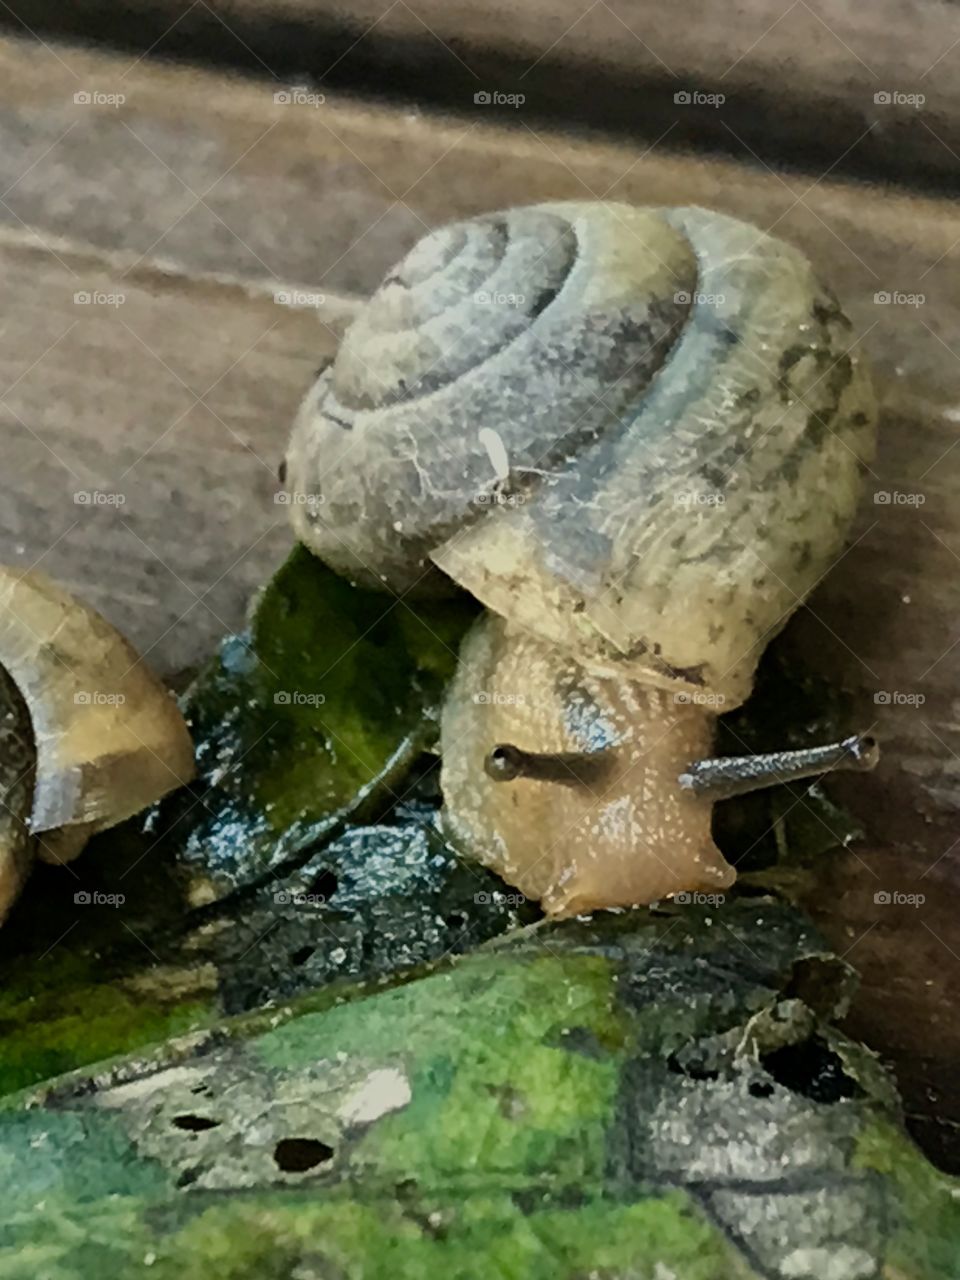 Snail eating lunch 